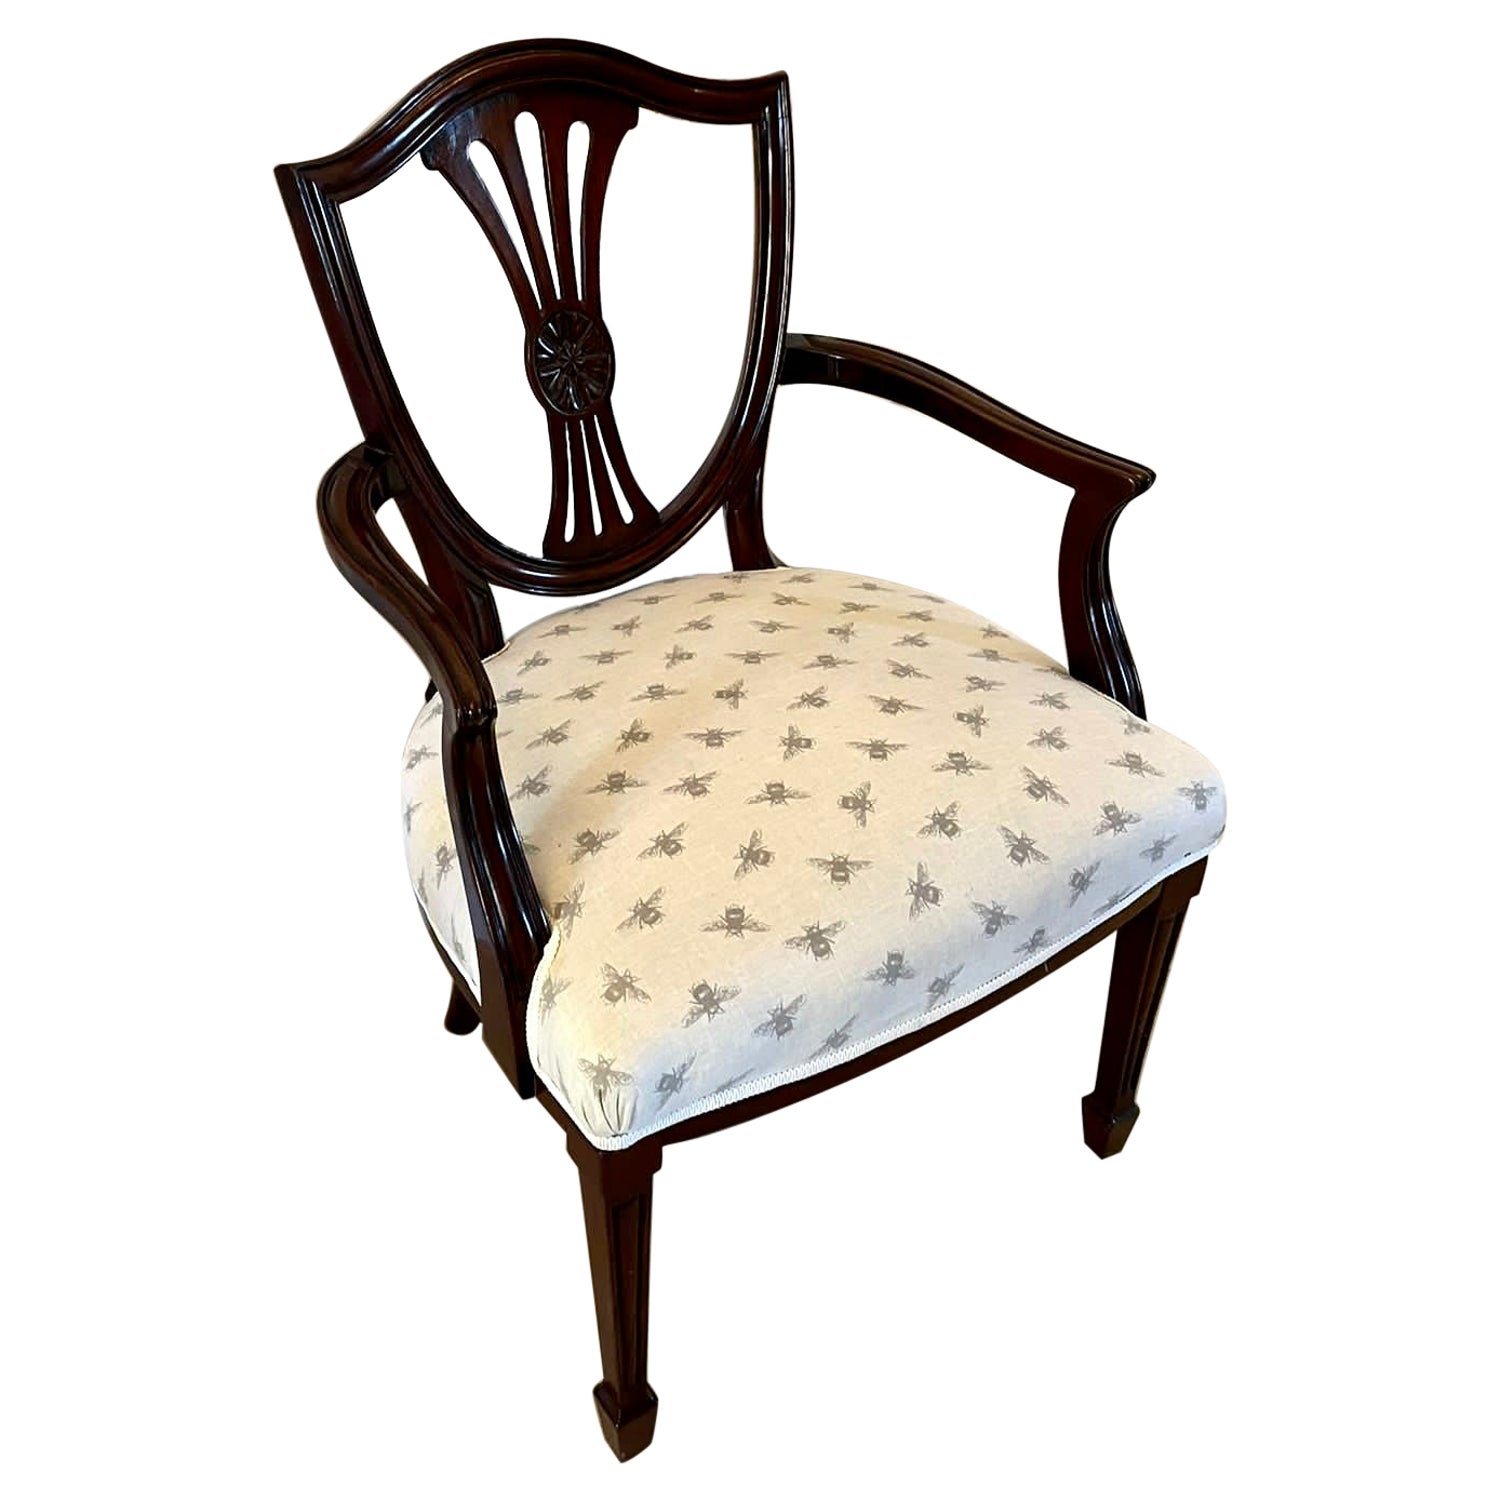 Antique Victorian Hepplewhite Style Mahogany Armchair For Sale at 1stDibs